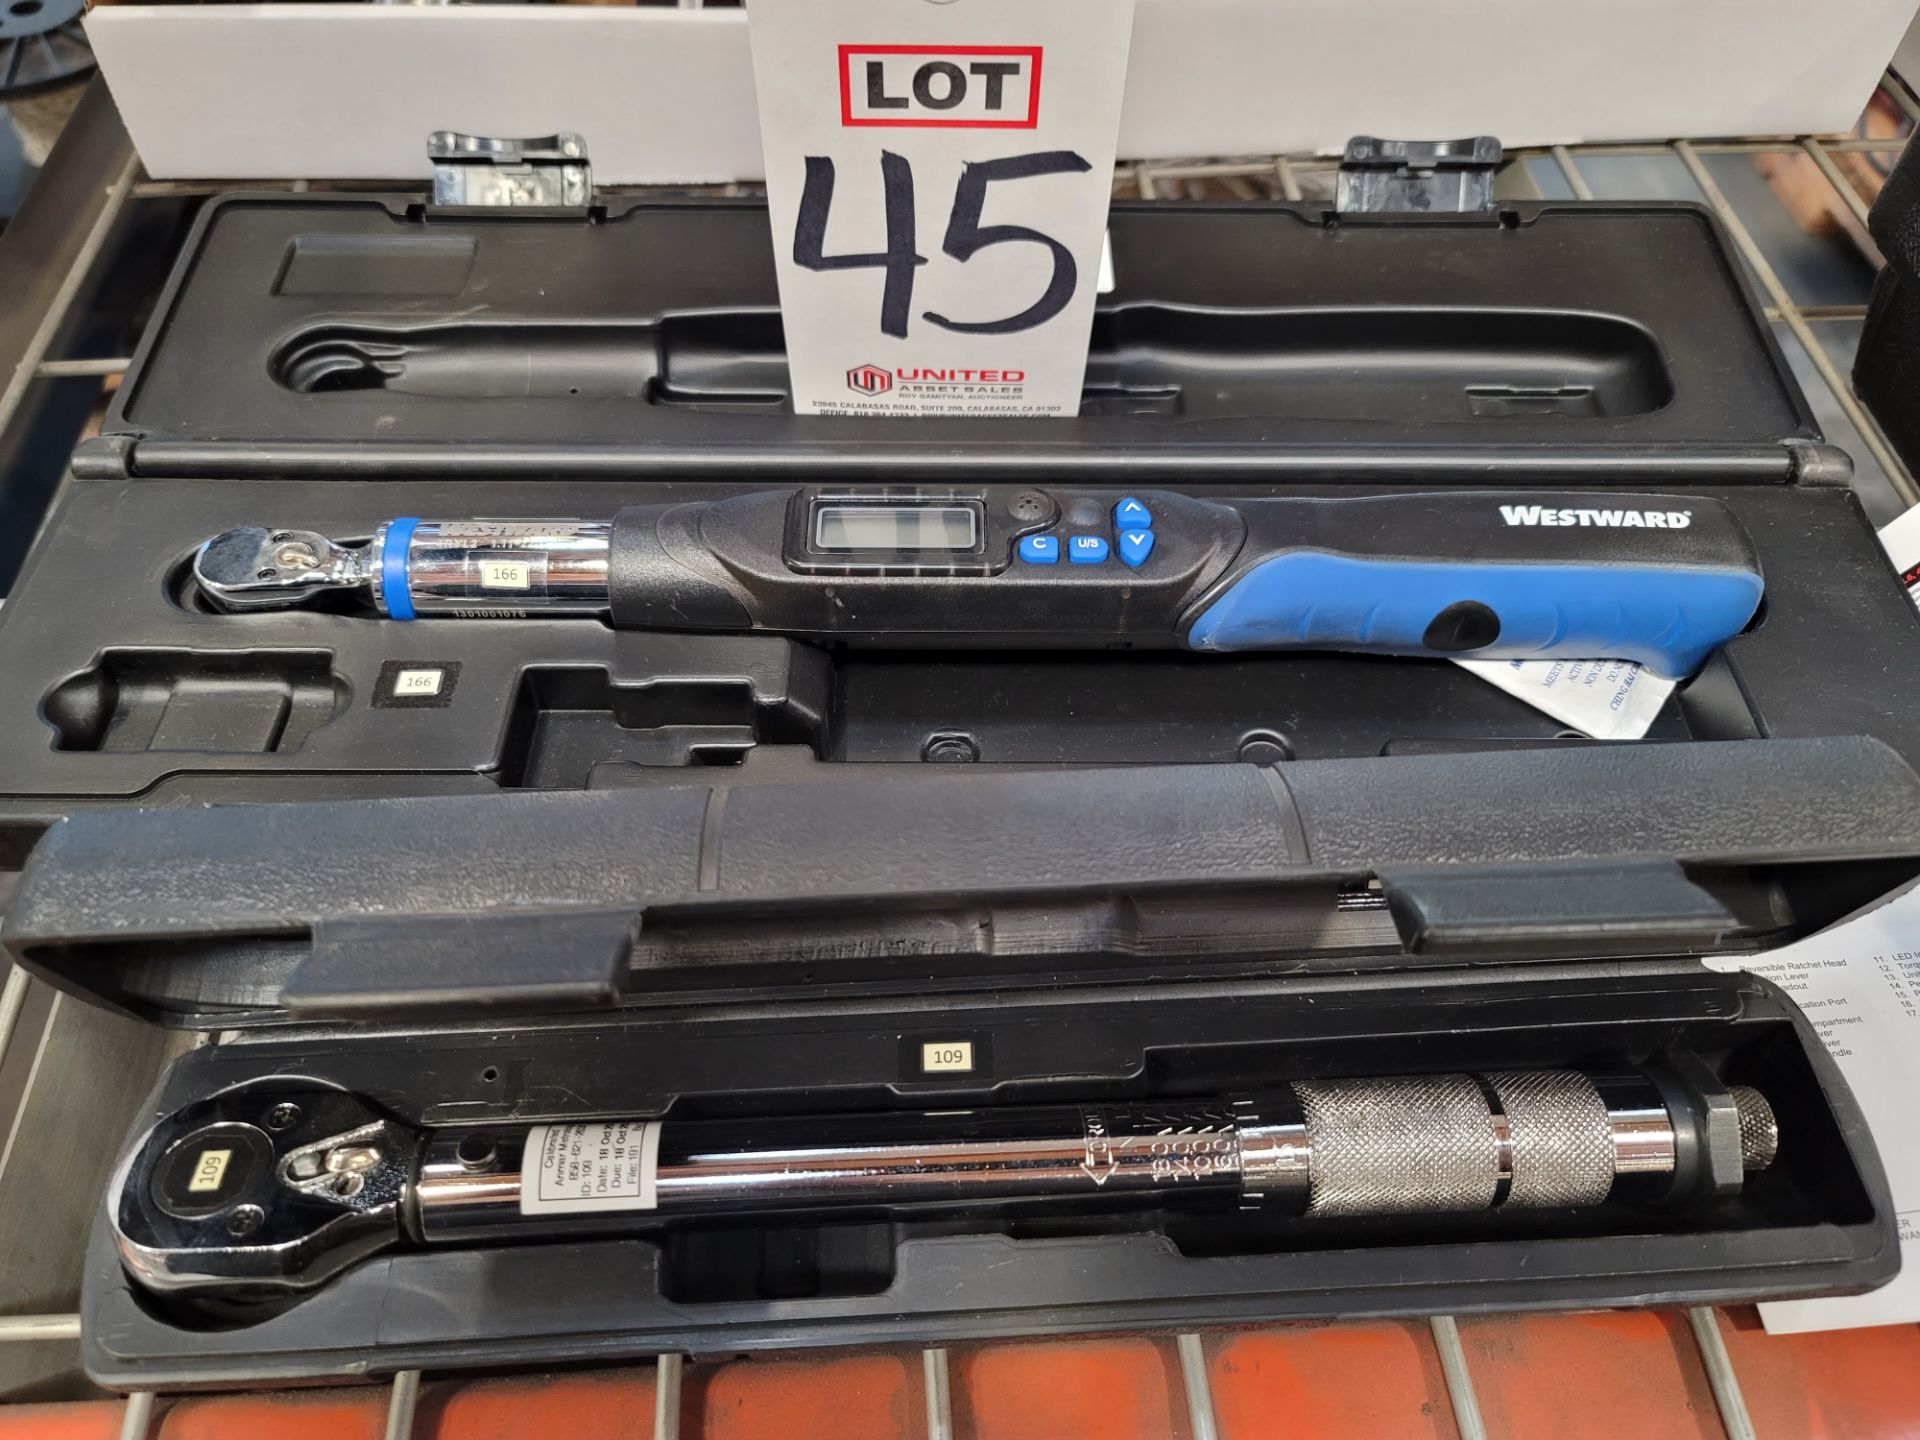 LOT - (1) WESTWARD 4RYL2 DIGITAL TORQUE WRENCH AND (1) PITTSBURGH CLICK-TYPE TORQUE WRENCH